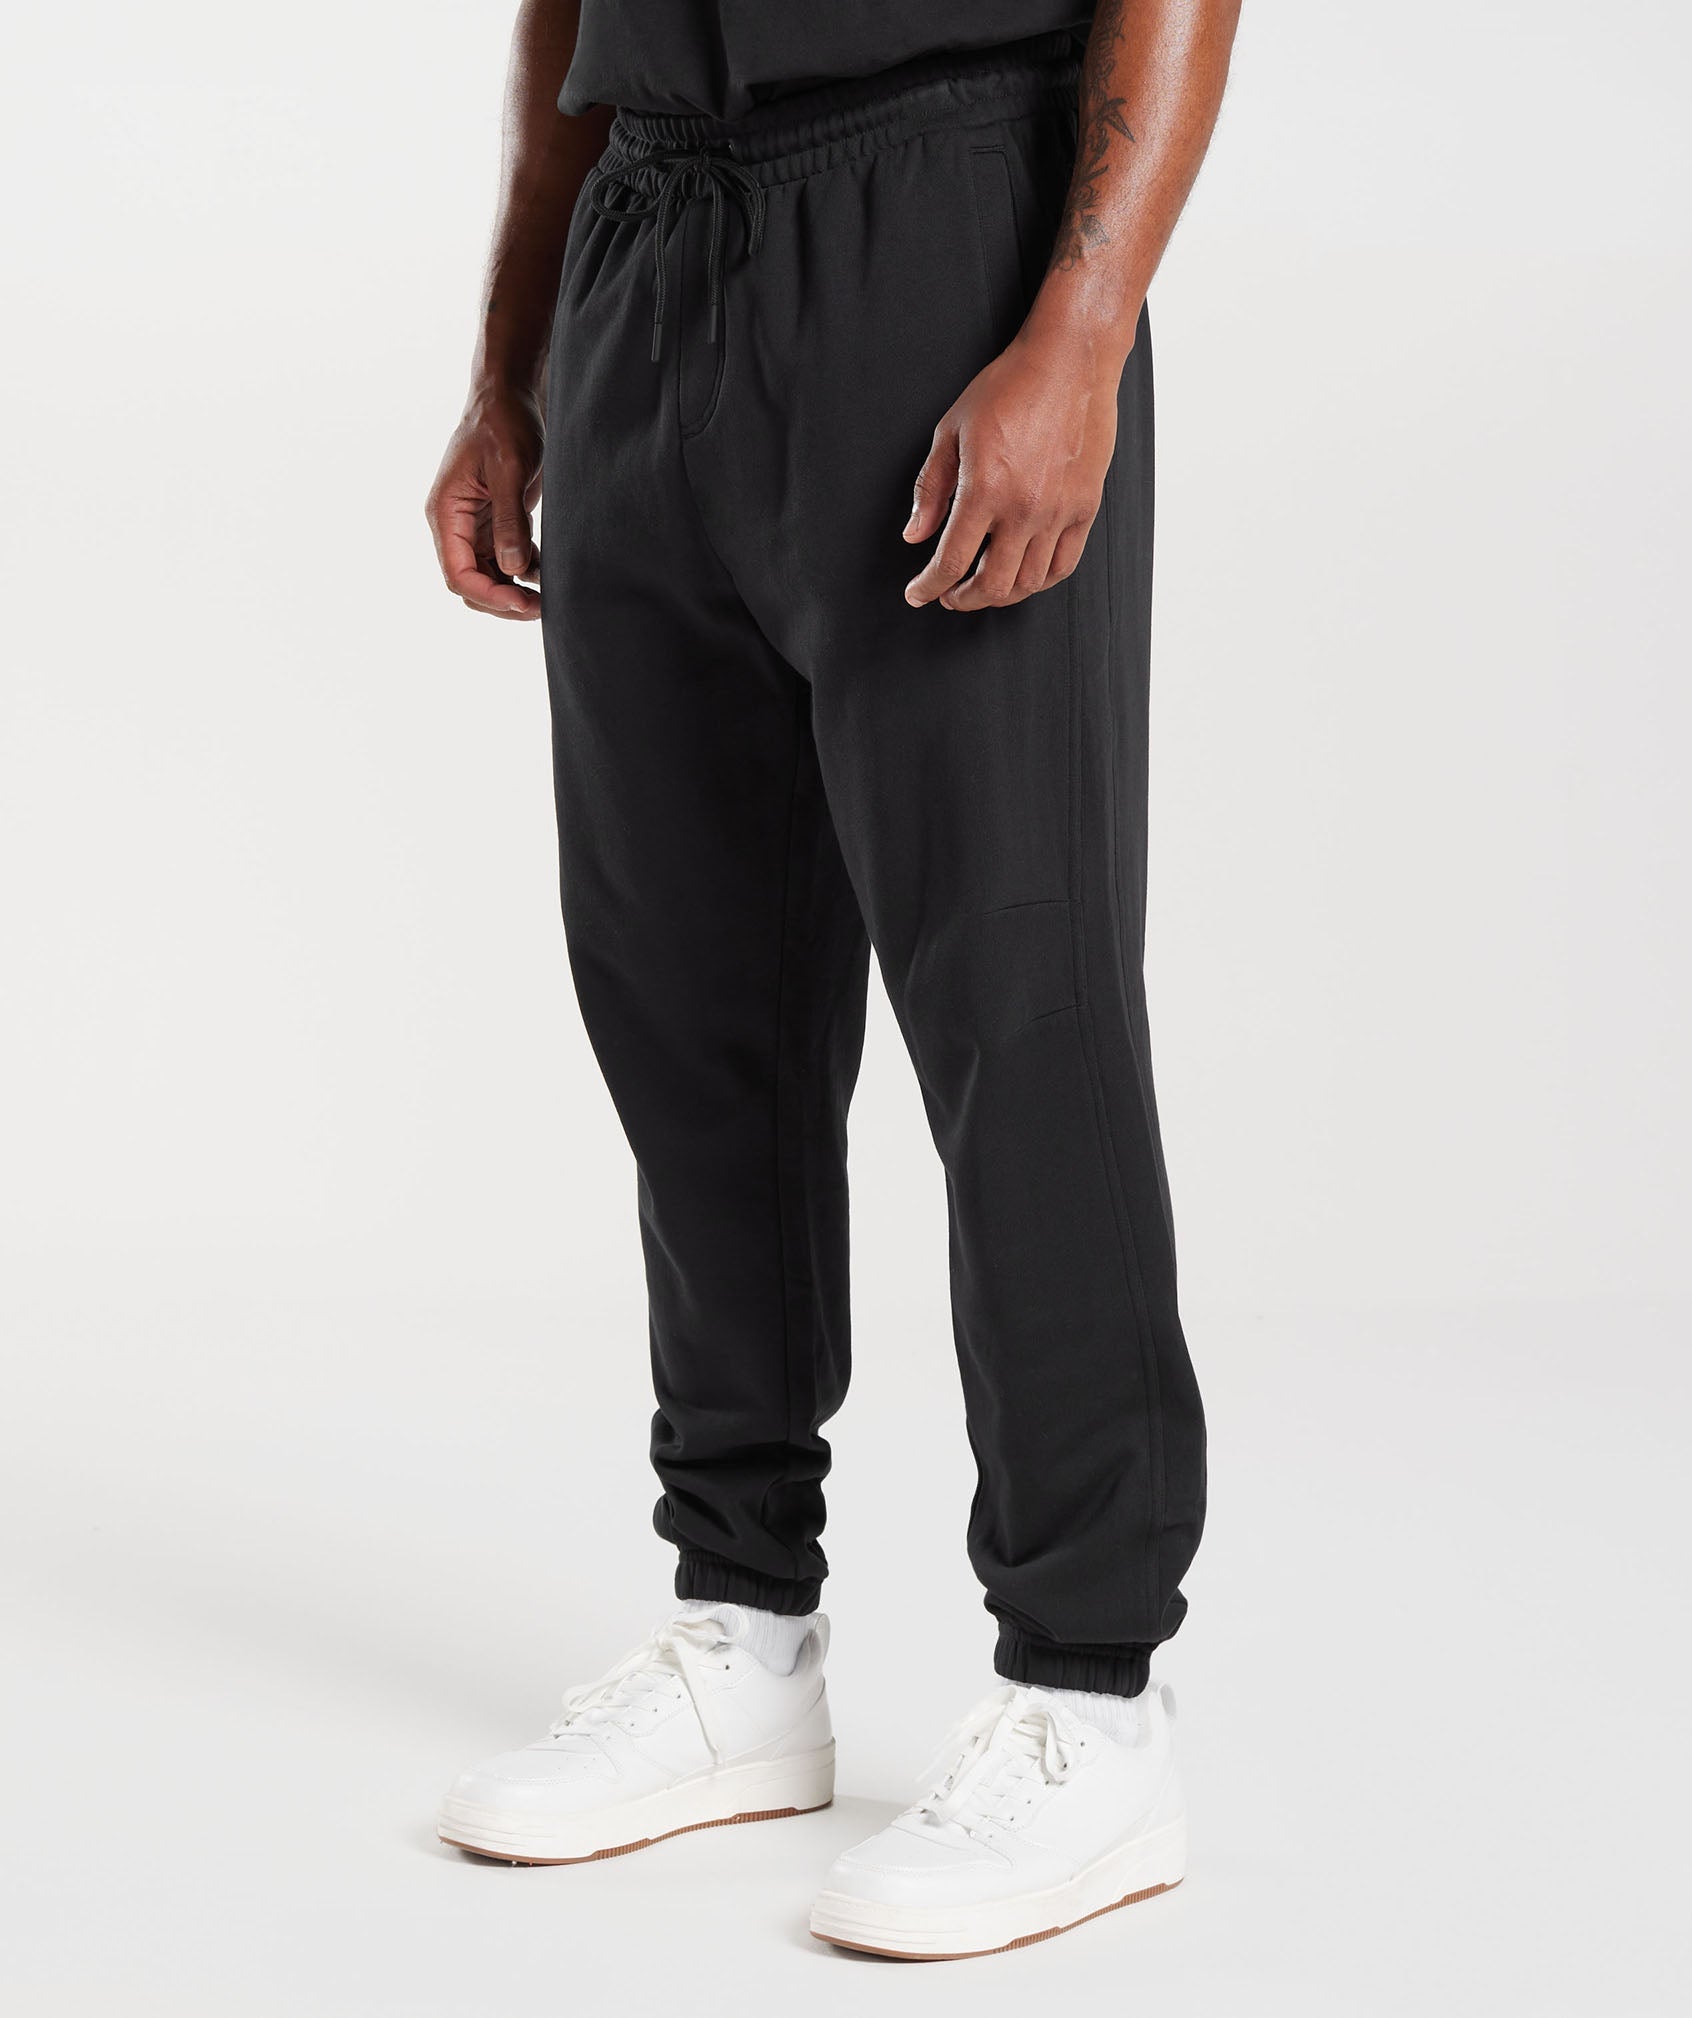 Rest Day Essentials Joggers in Black - view 3